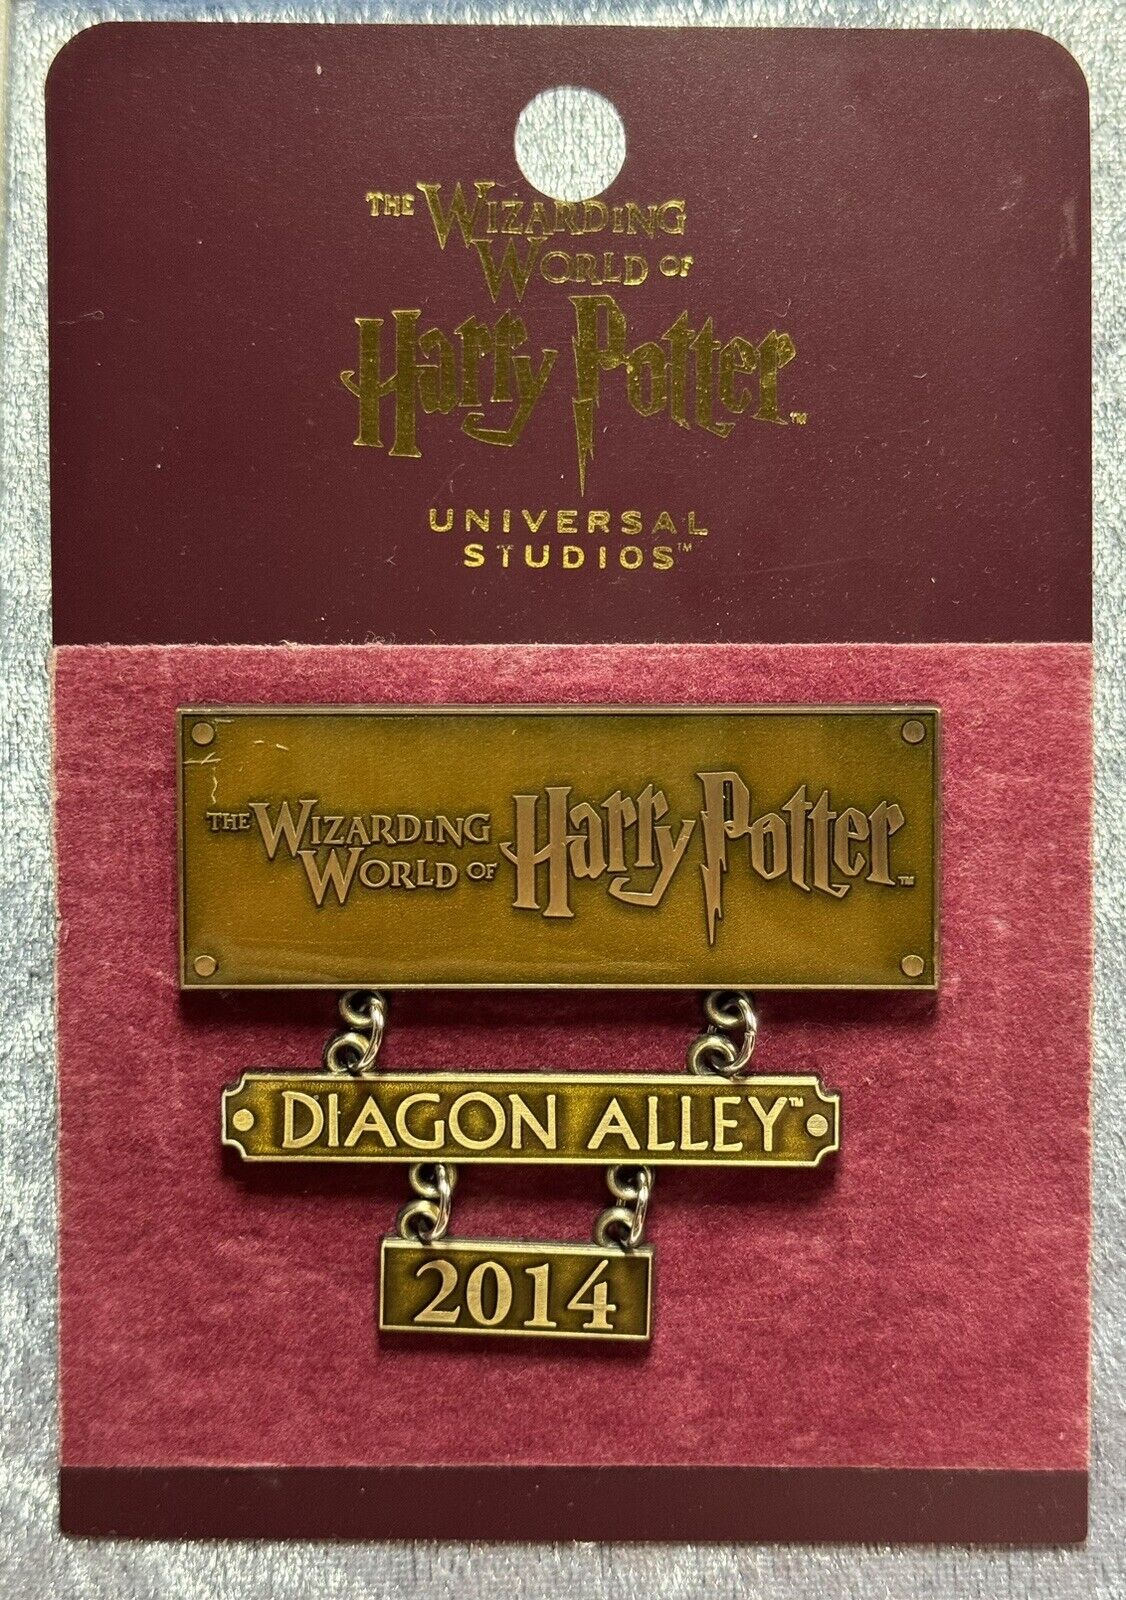 Authentic Wizarding World of Harry Potter Diagon Alley Pin-Universal Studios